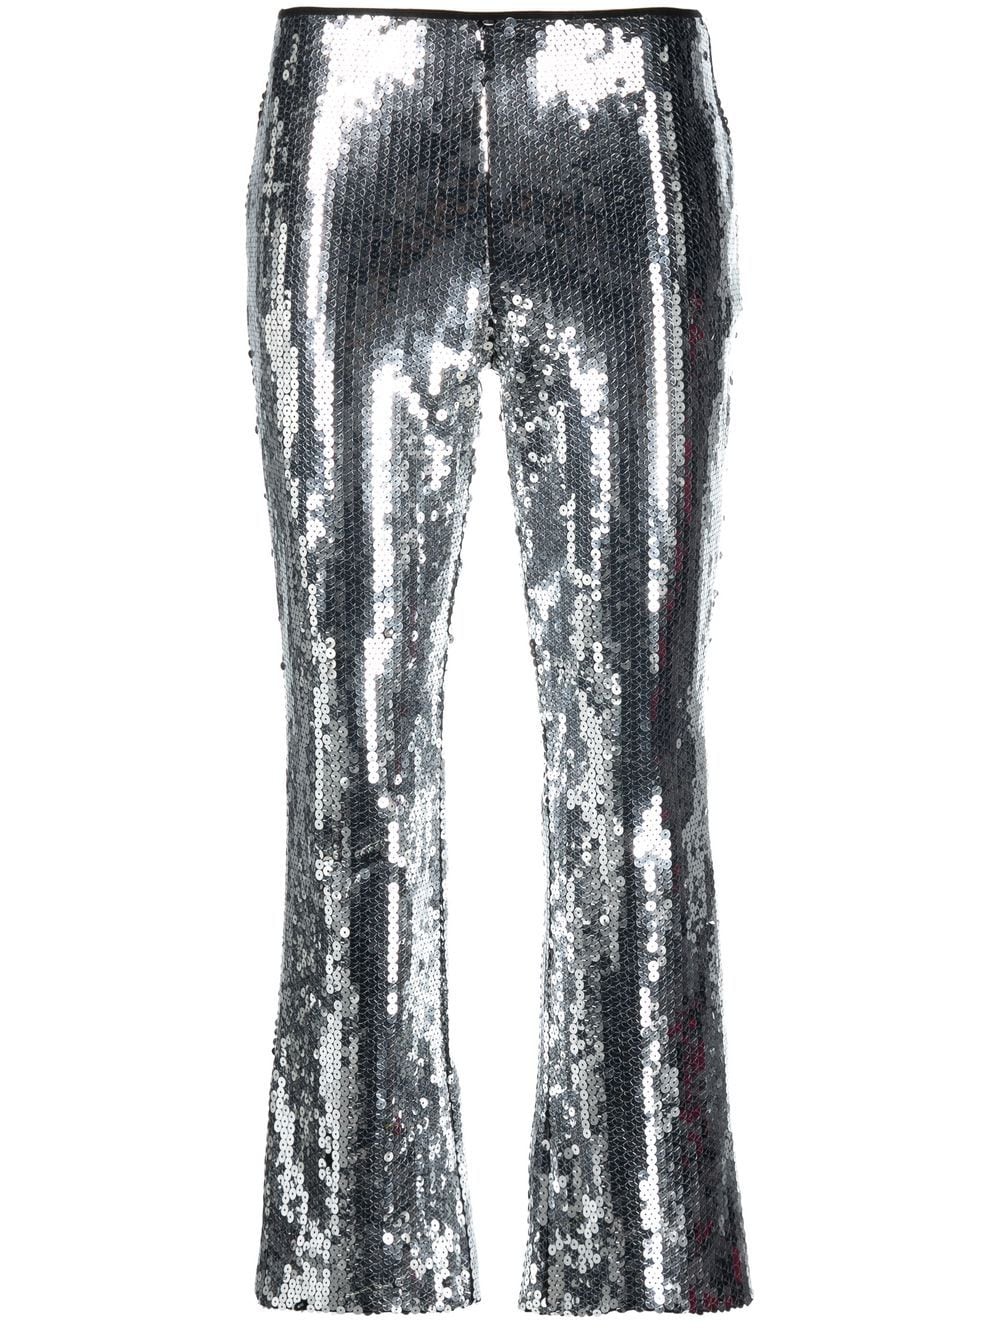 Dolce & Gabbana Pre-Owned 2000s sequinned cropped trousers